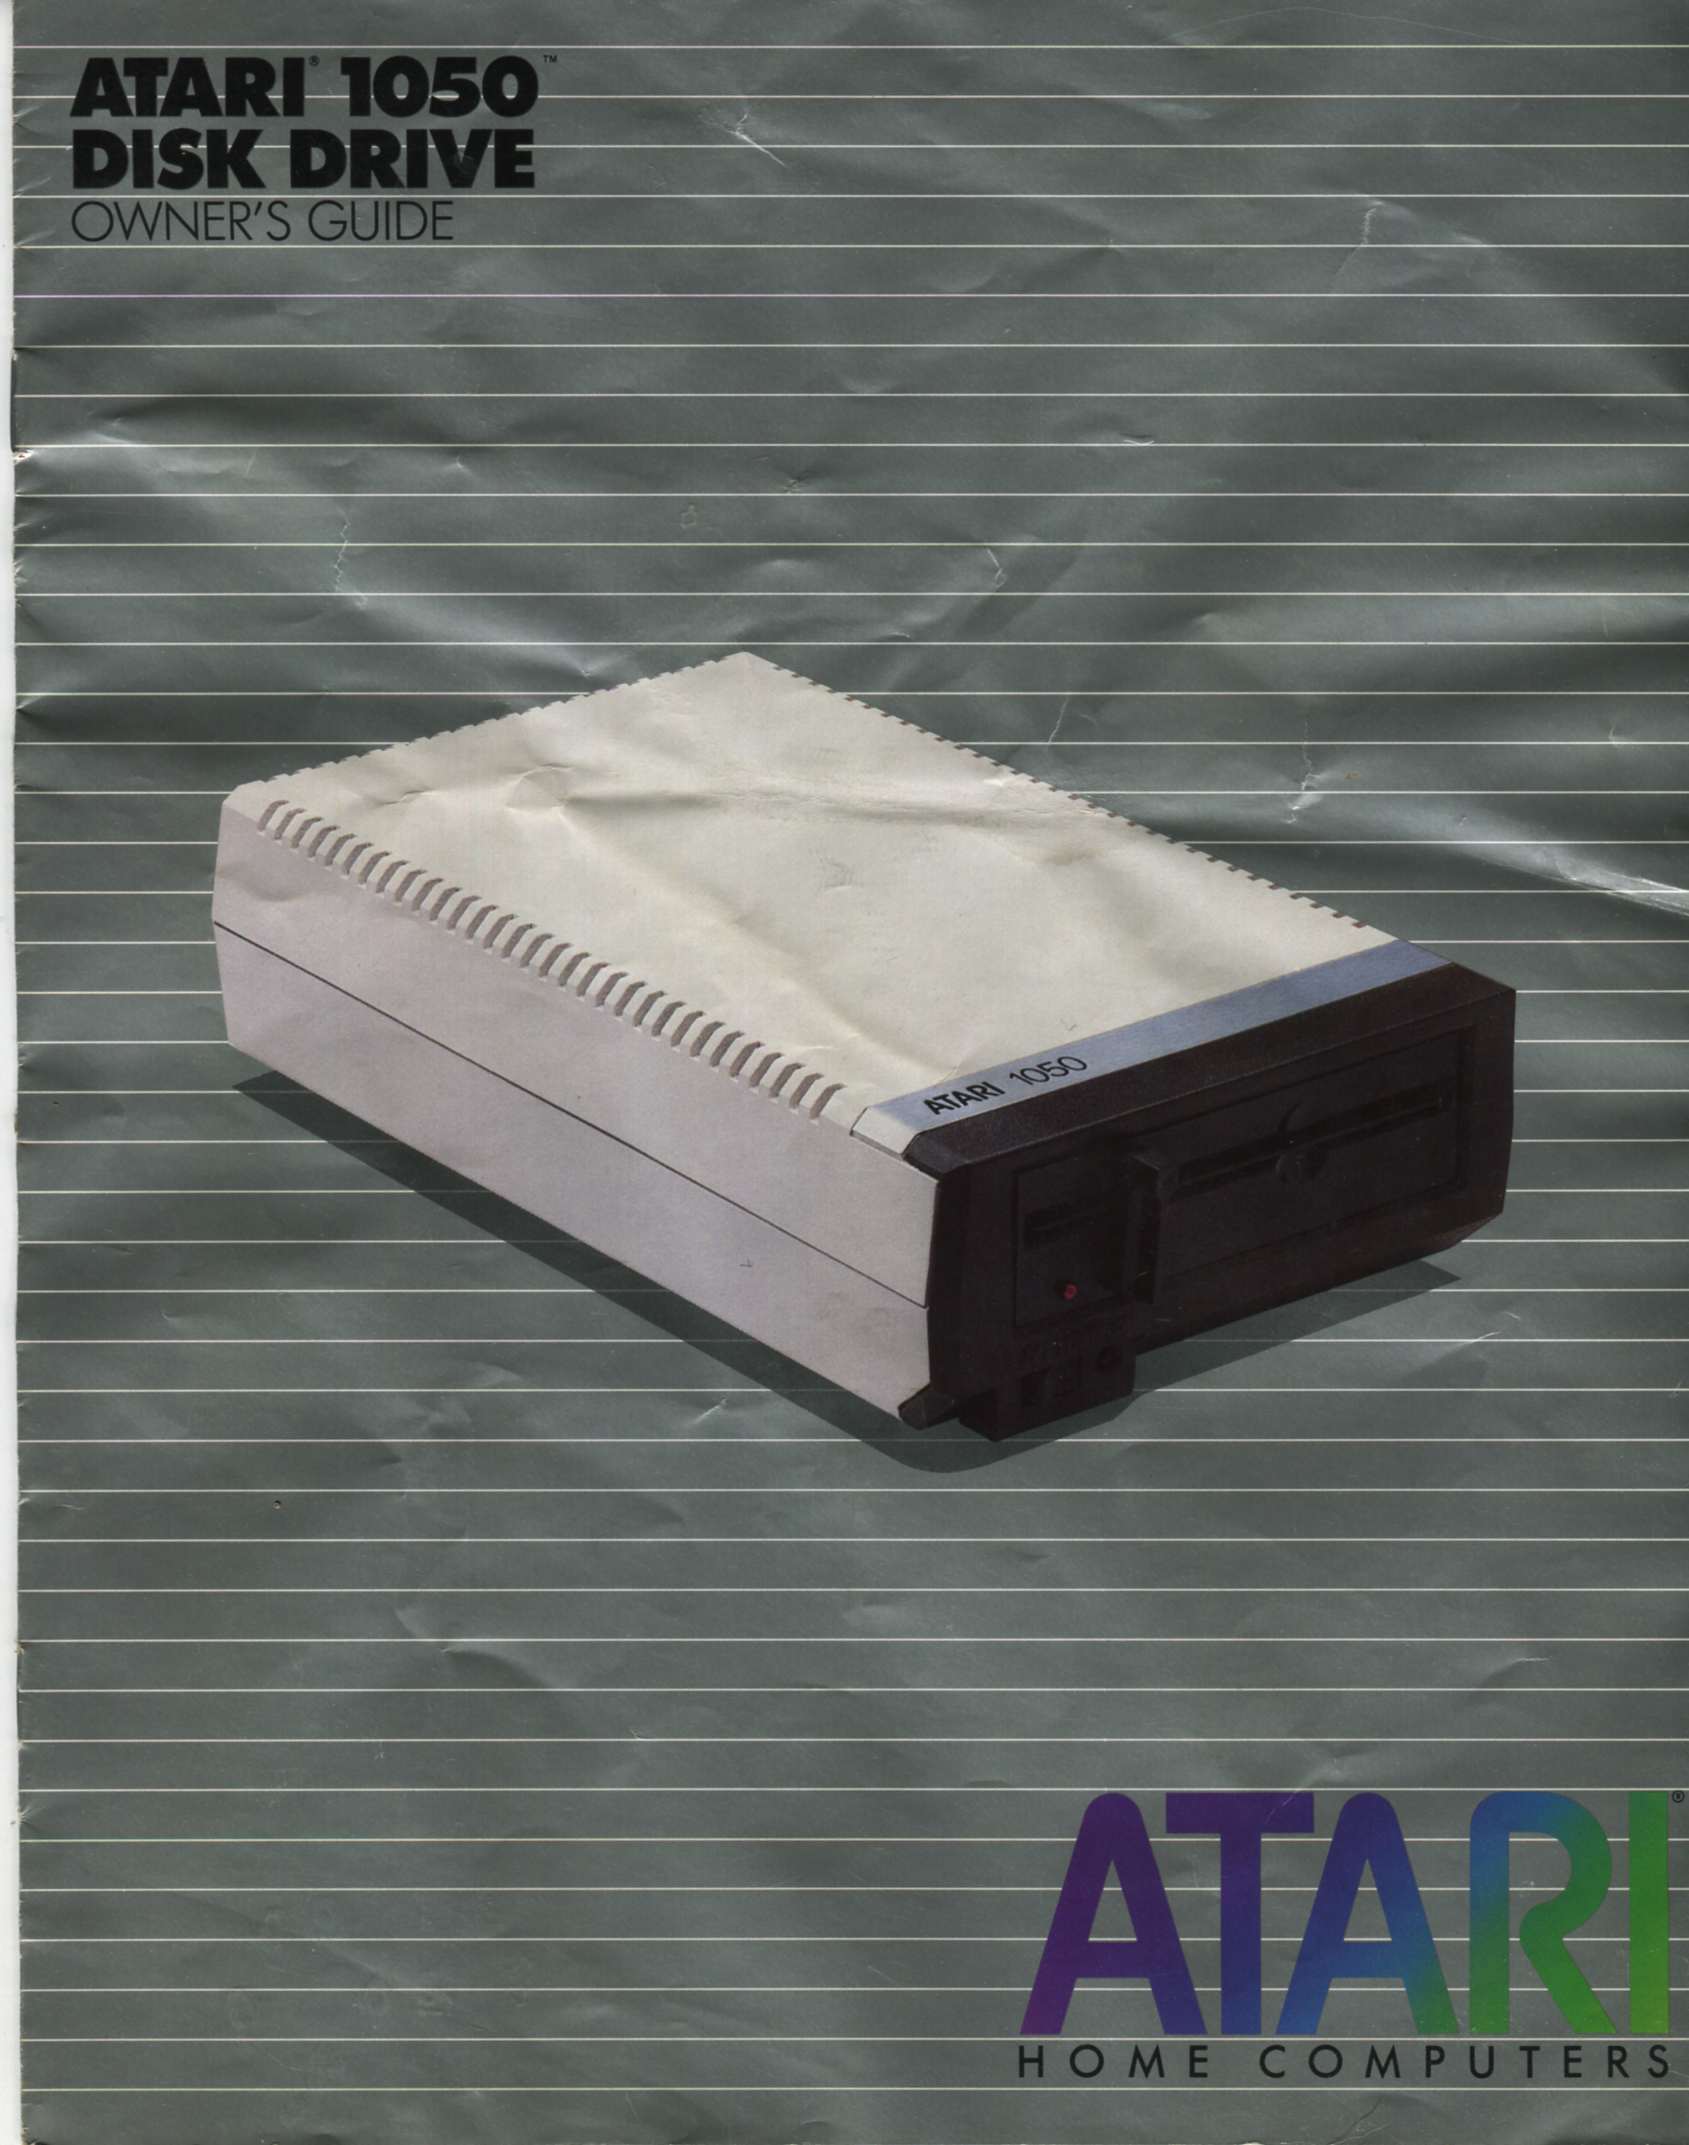 Atar 1050 Owners Guide Cover